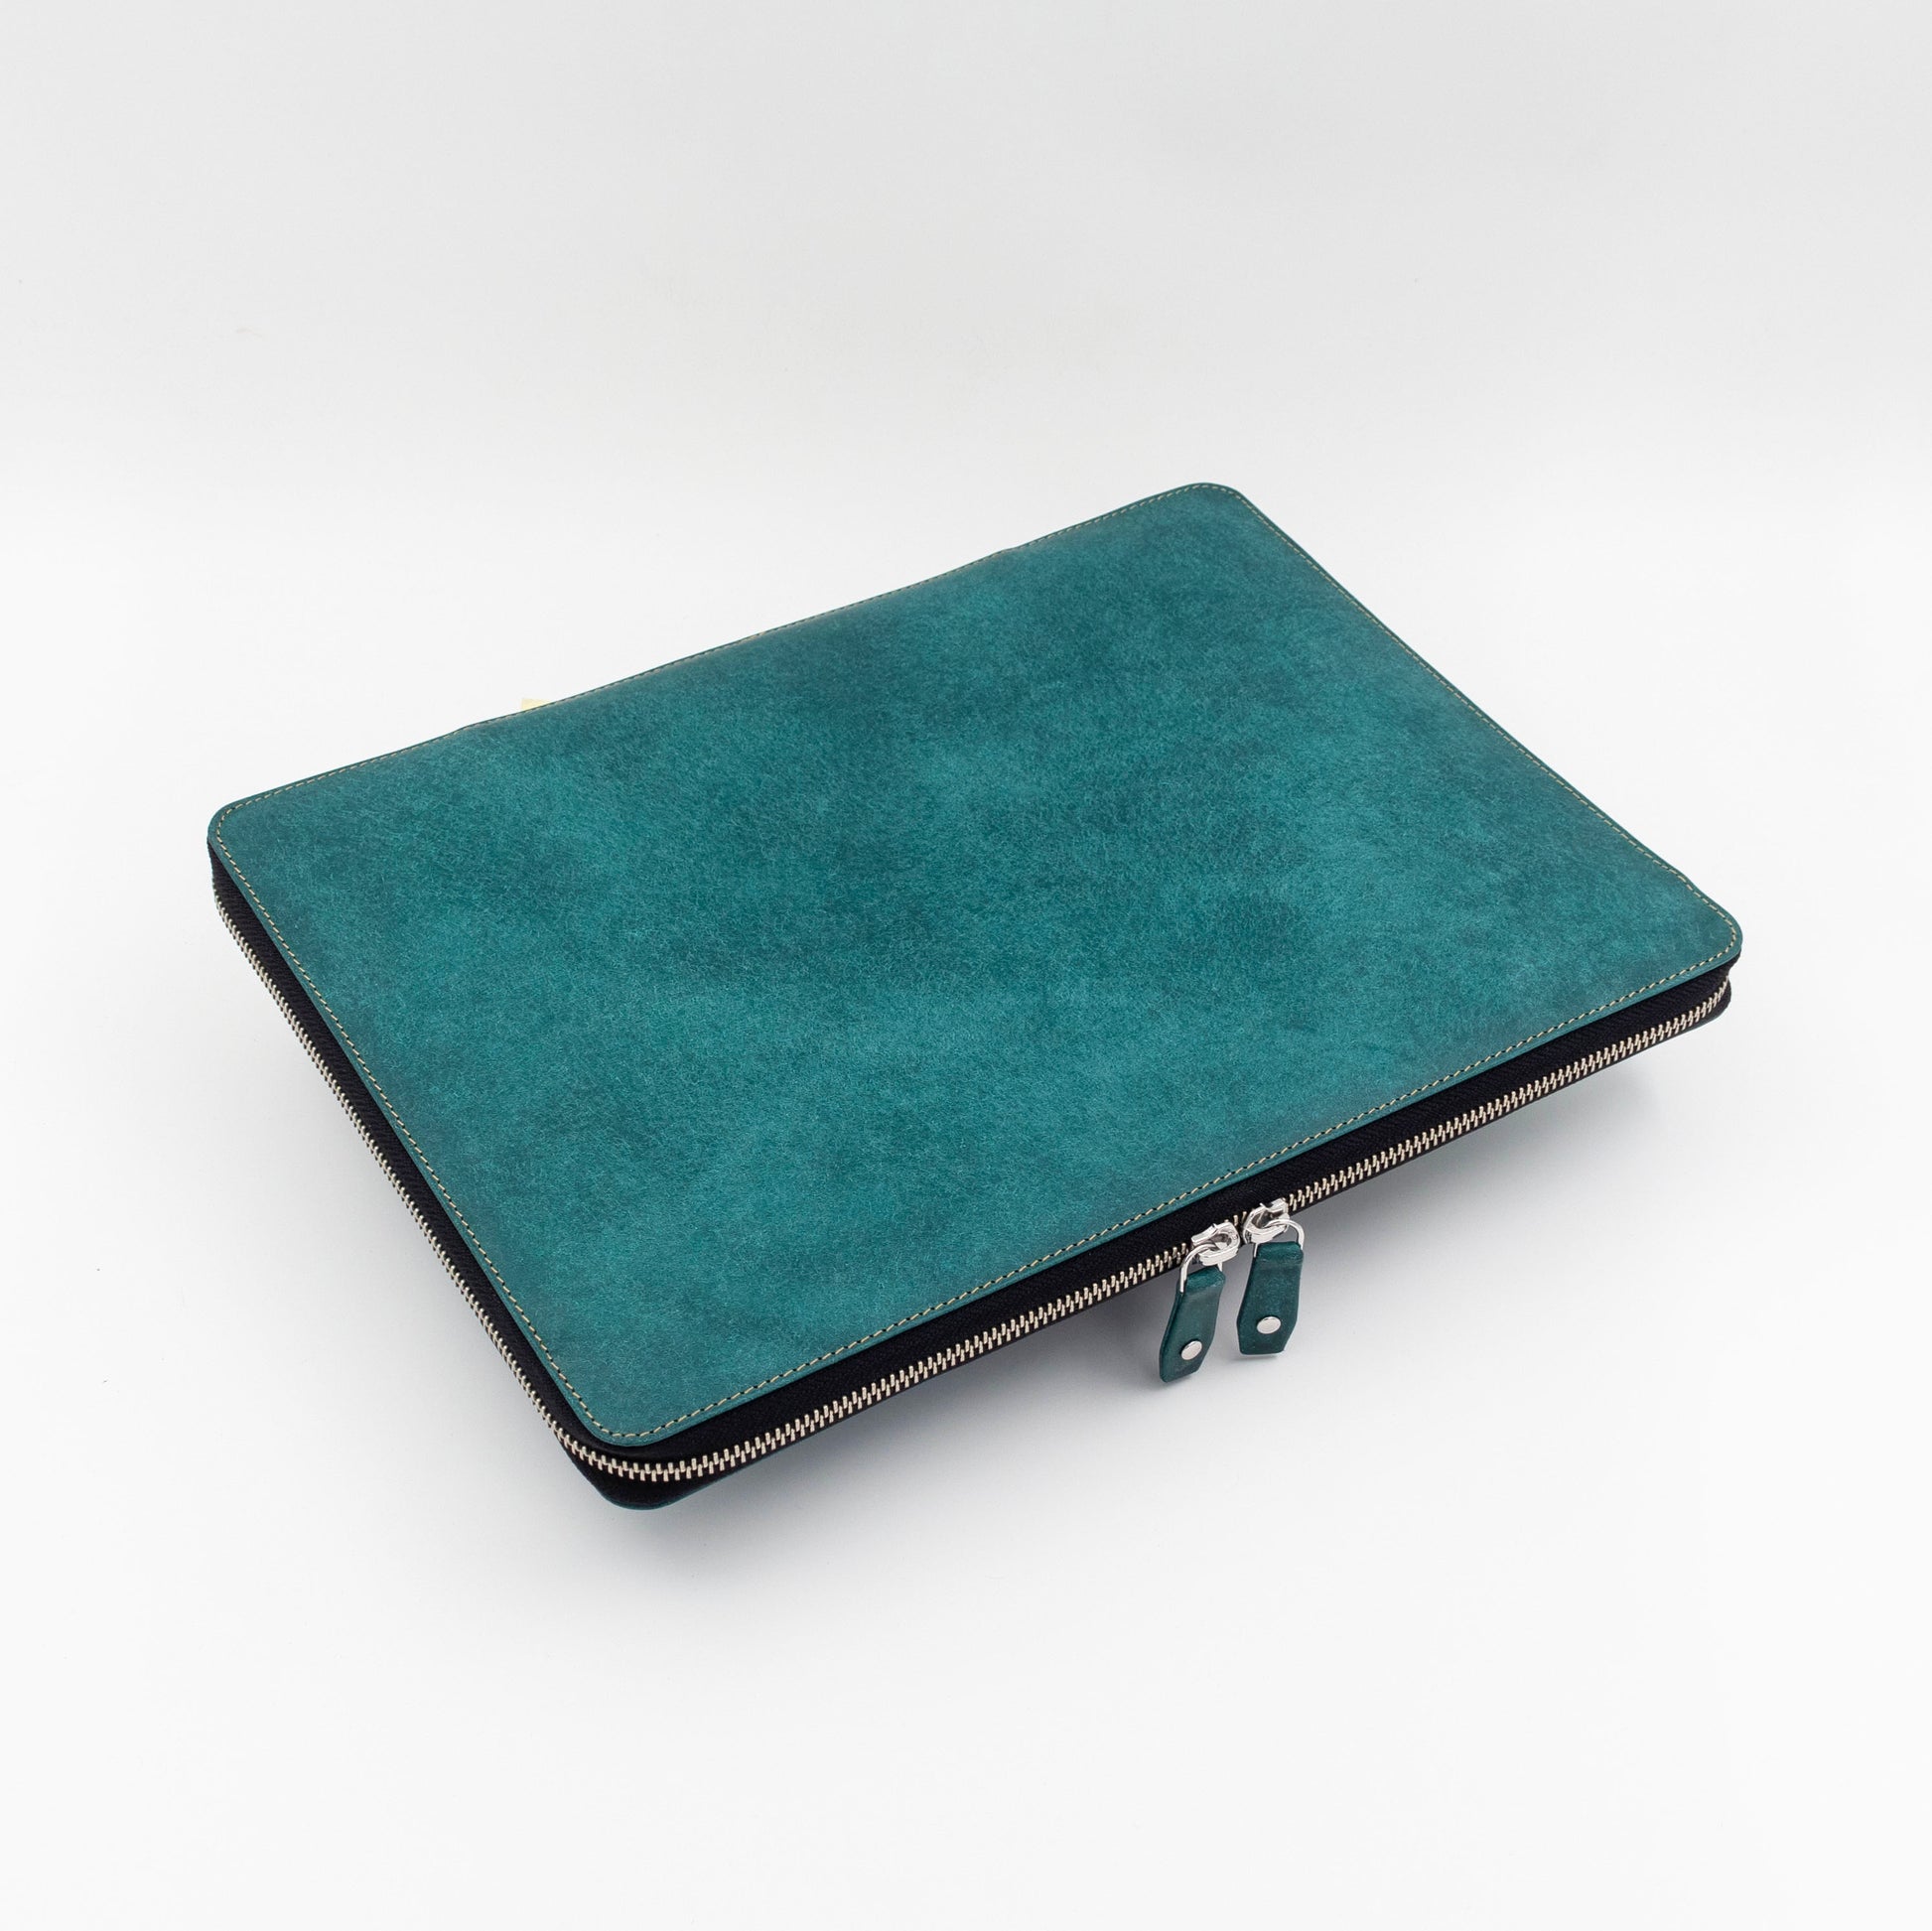 Handmade leather laptop case with a zip around closure. Designed to fit the surface pro device with a keyboard